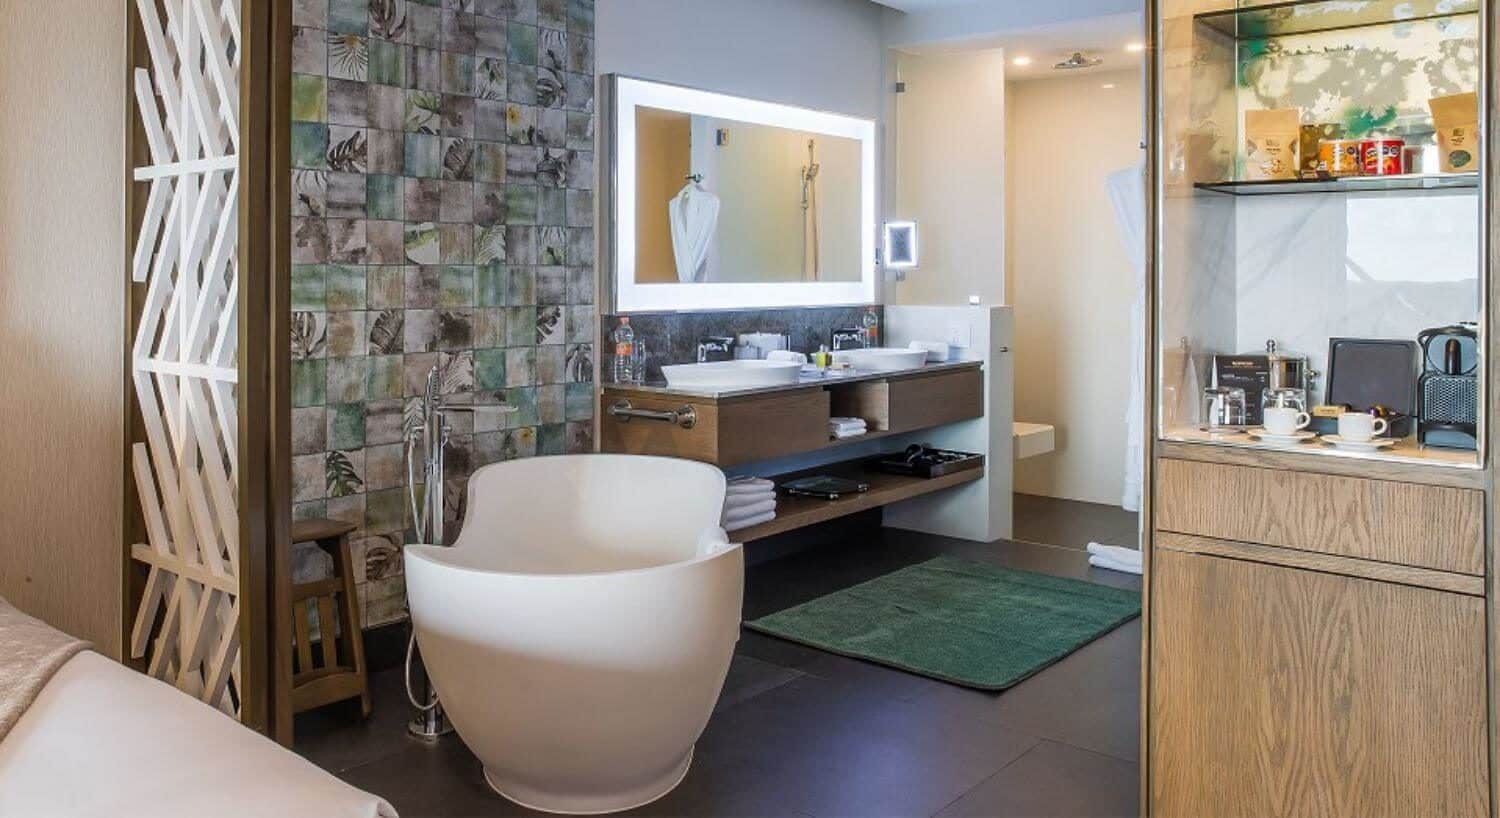 A bathroom with 2 sinks, a deep soaking tub, a separate shower, and a coffee and snack center near the bathroom, and a corner of a bed next to the bathroom.